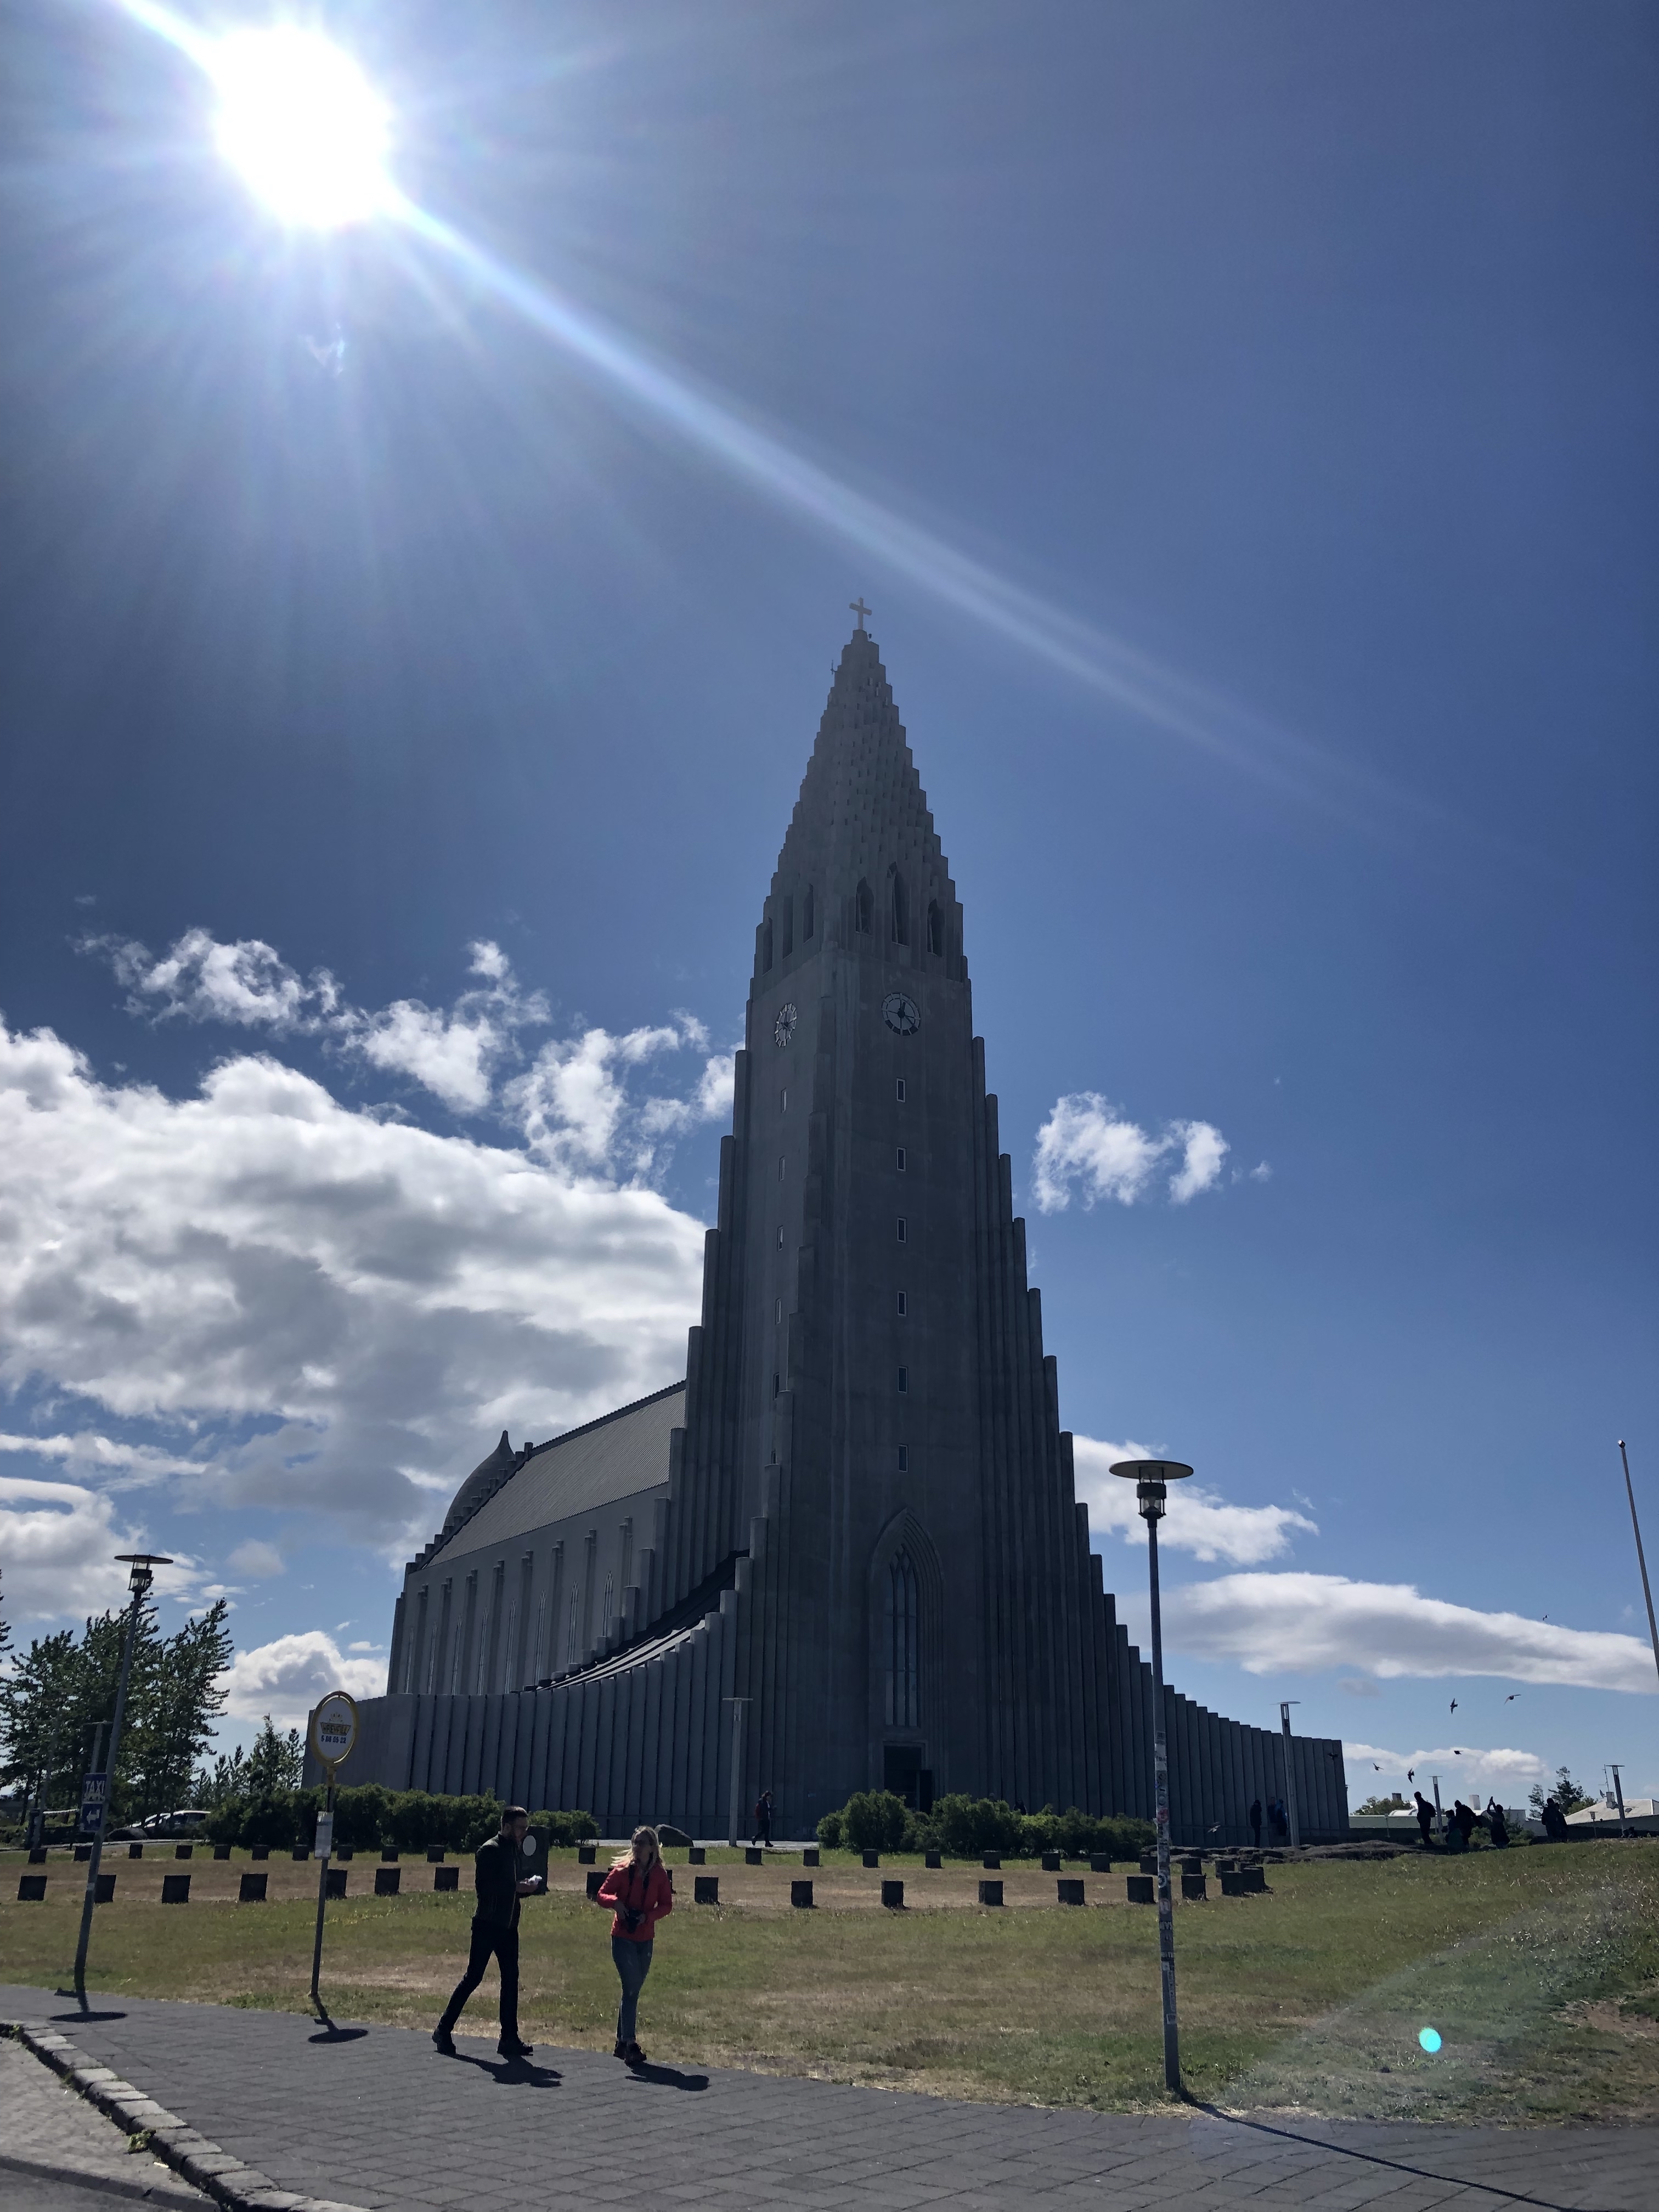 Large church in Iceland. Shaped like a rocket and pointing into a blue sky with a cross at the top